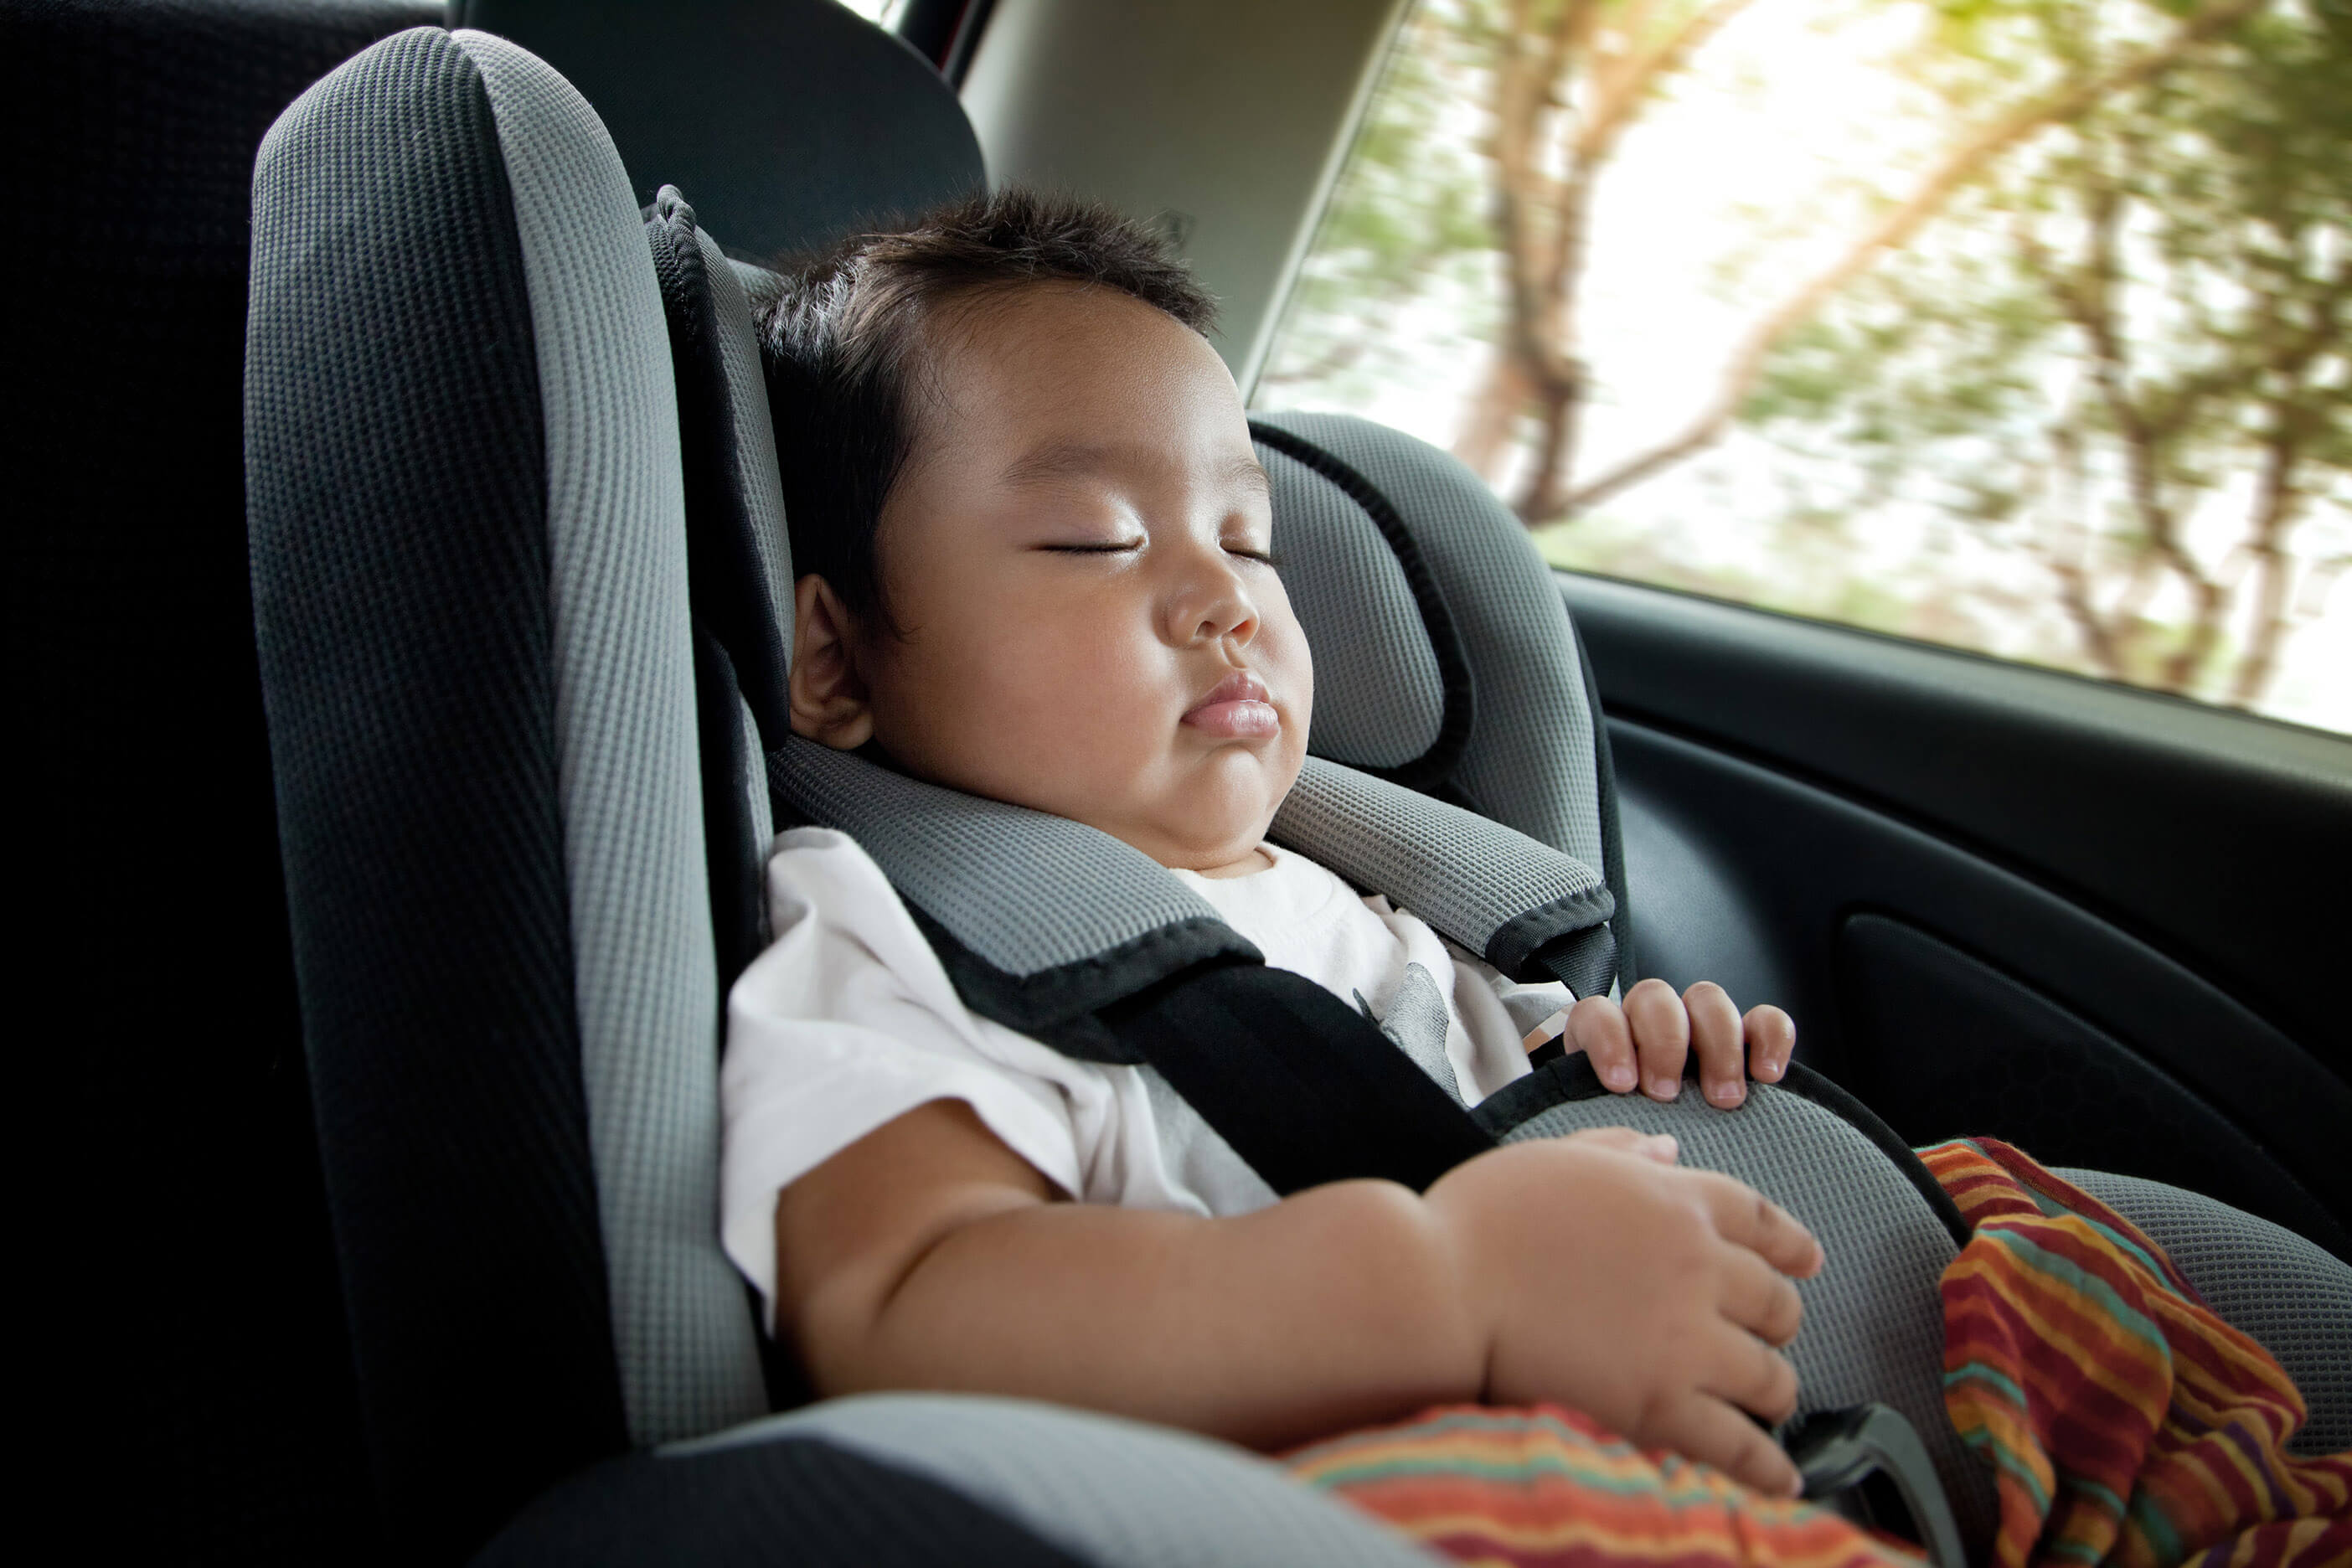 An infant safely sleeping in car seat